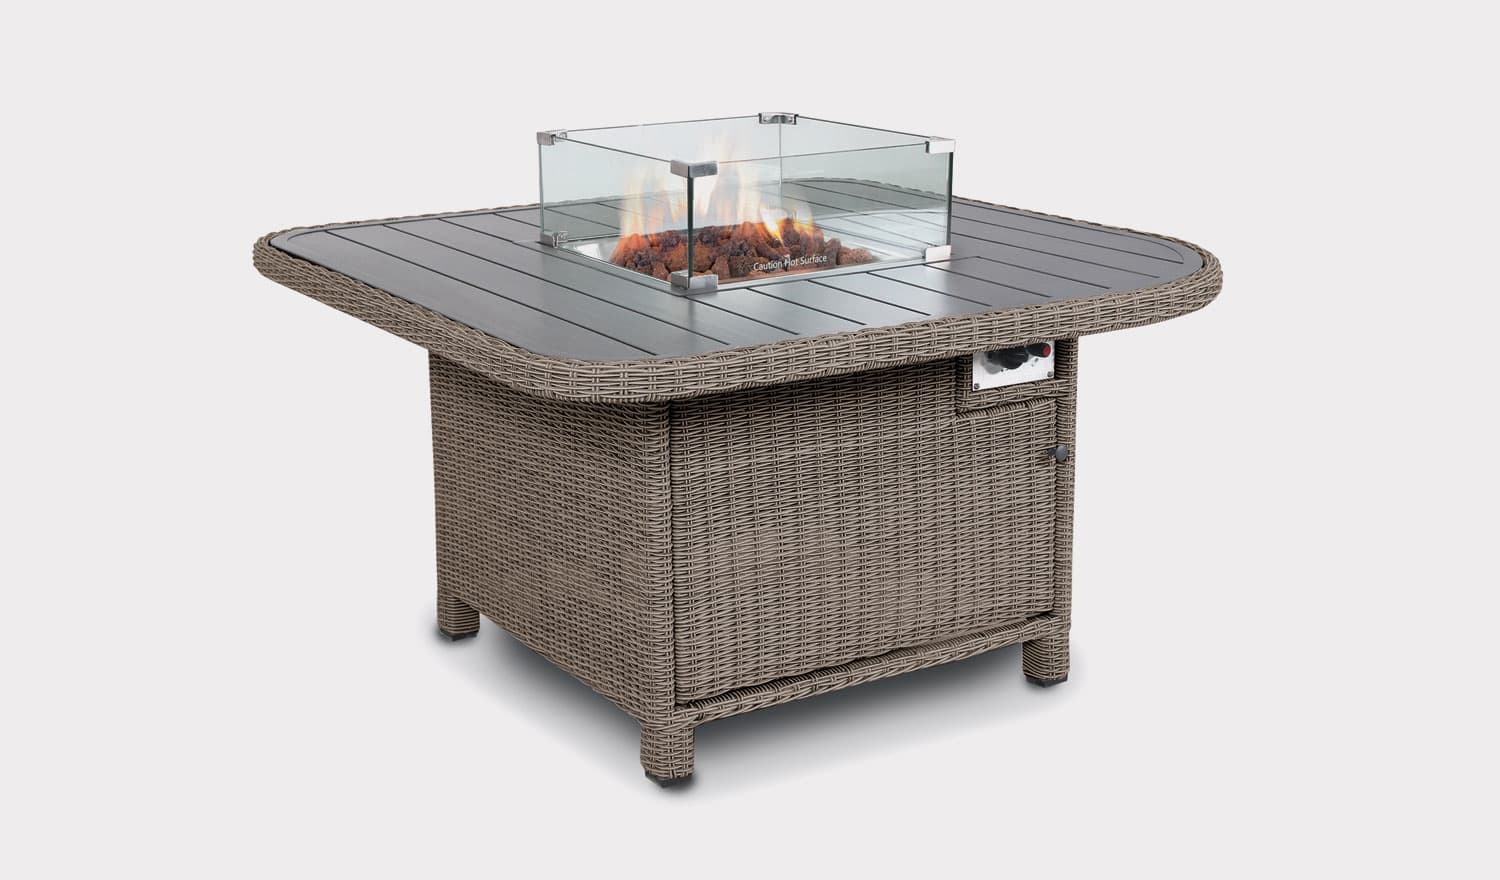 Palma Grande Fire Pit Table Kettler, What Is A Fire Pit Table